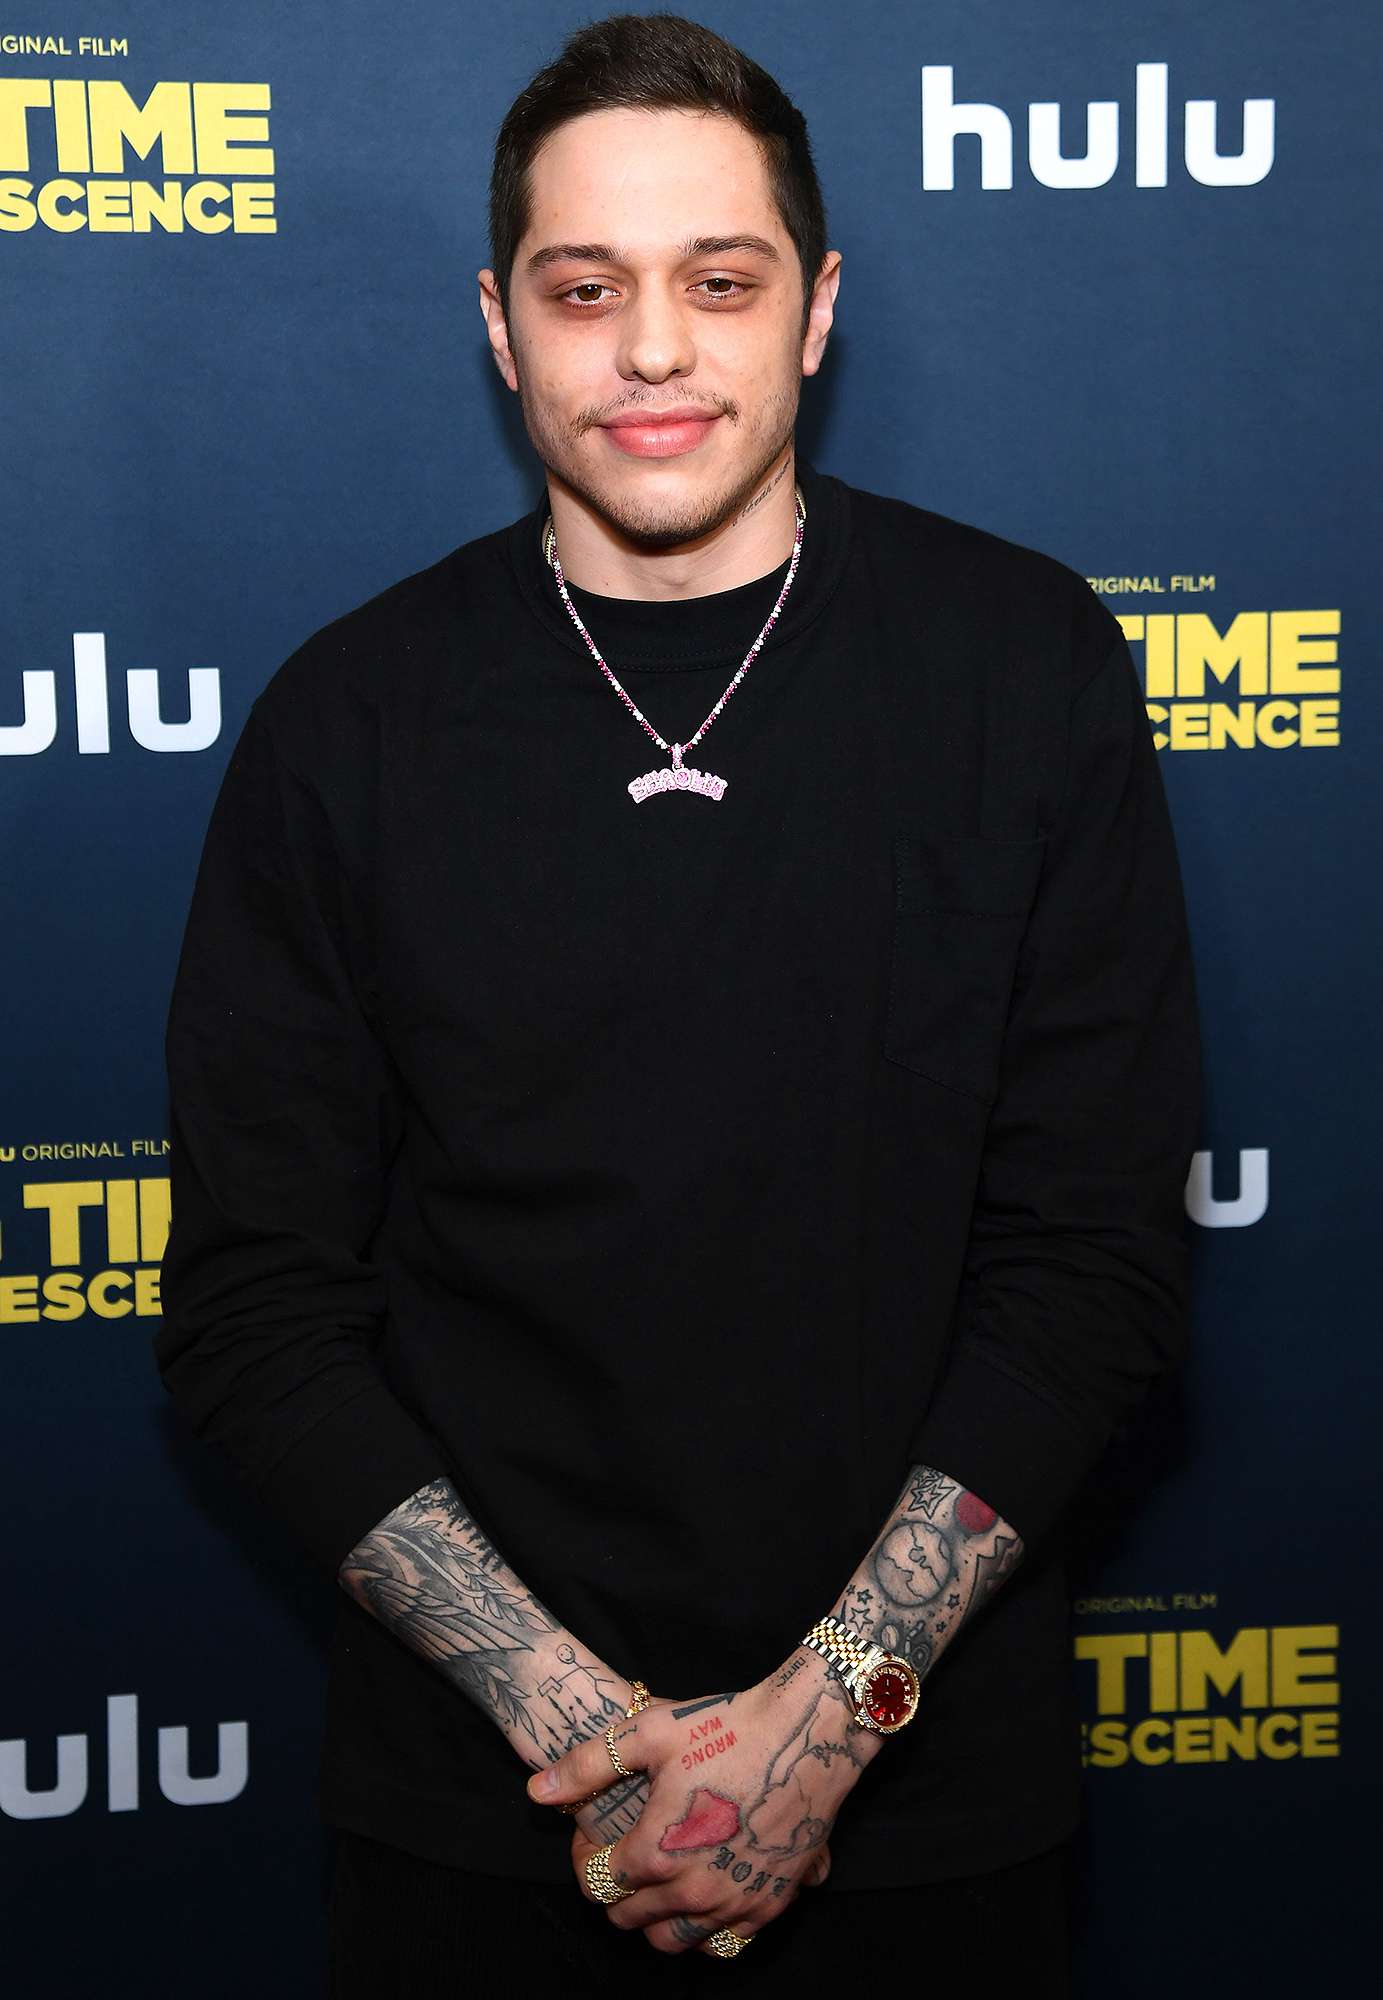 Pete Davidson Set to Star as Himself in New Lorne Michaels Comedy |  PEOPLE.com